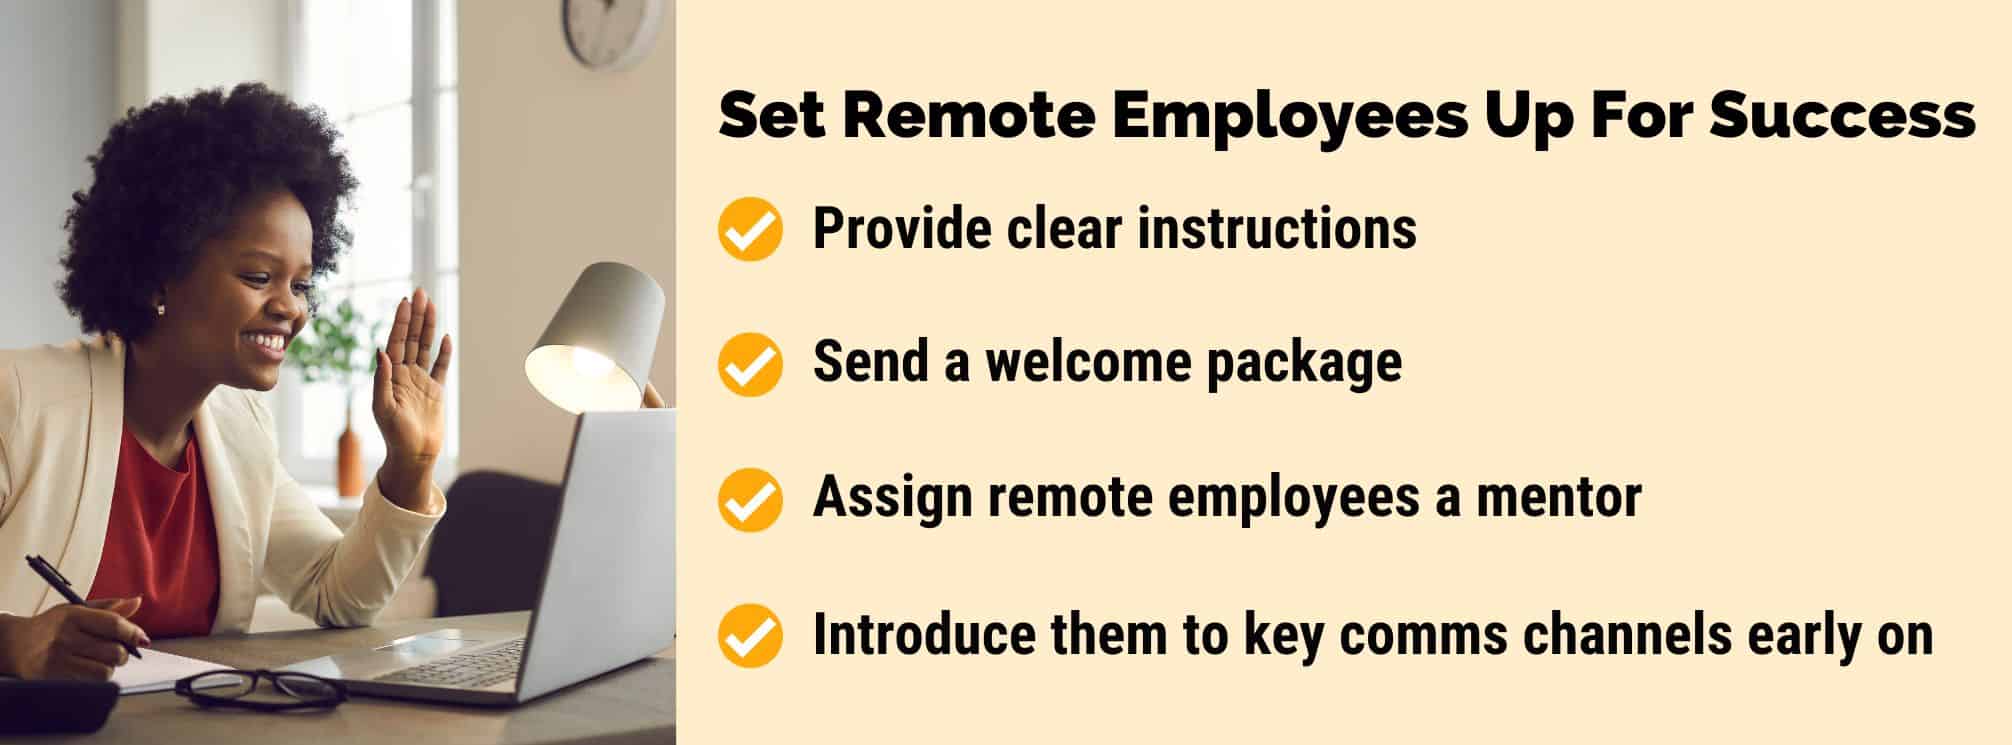 young black remote employee on a video call for work. Text that says "set remote employees up for success" with four best practices to do that.